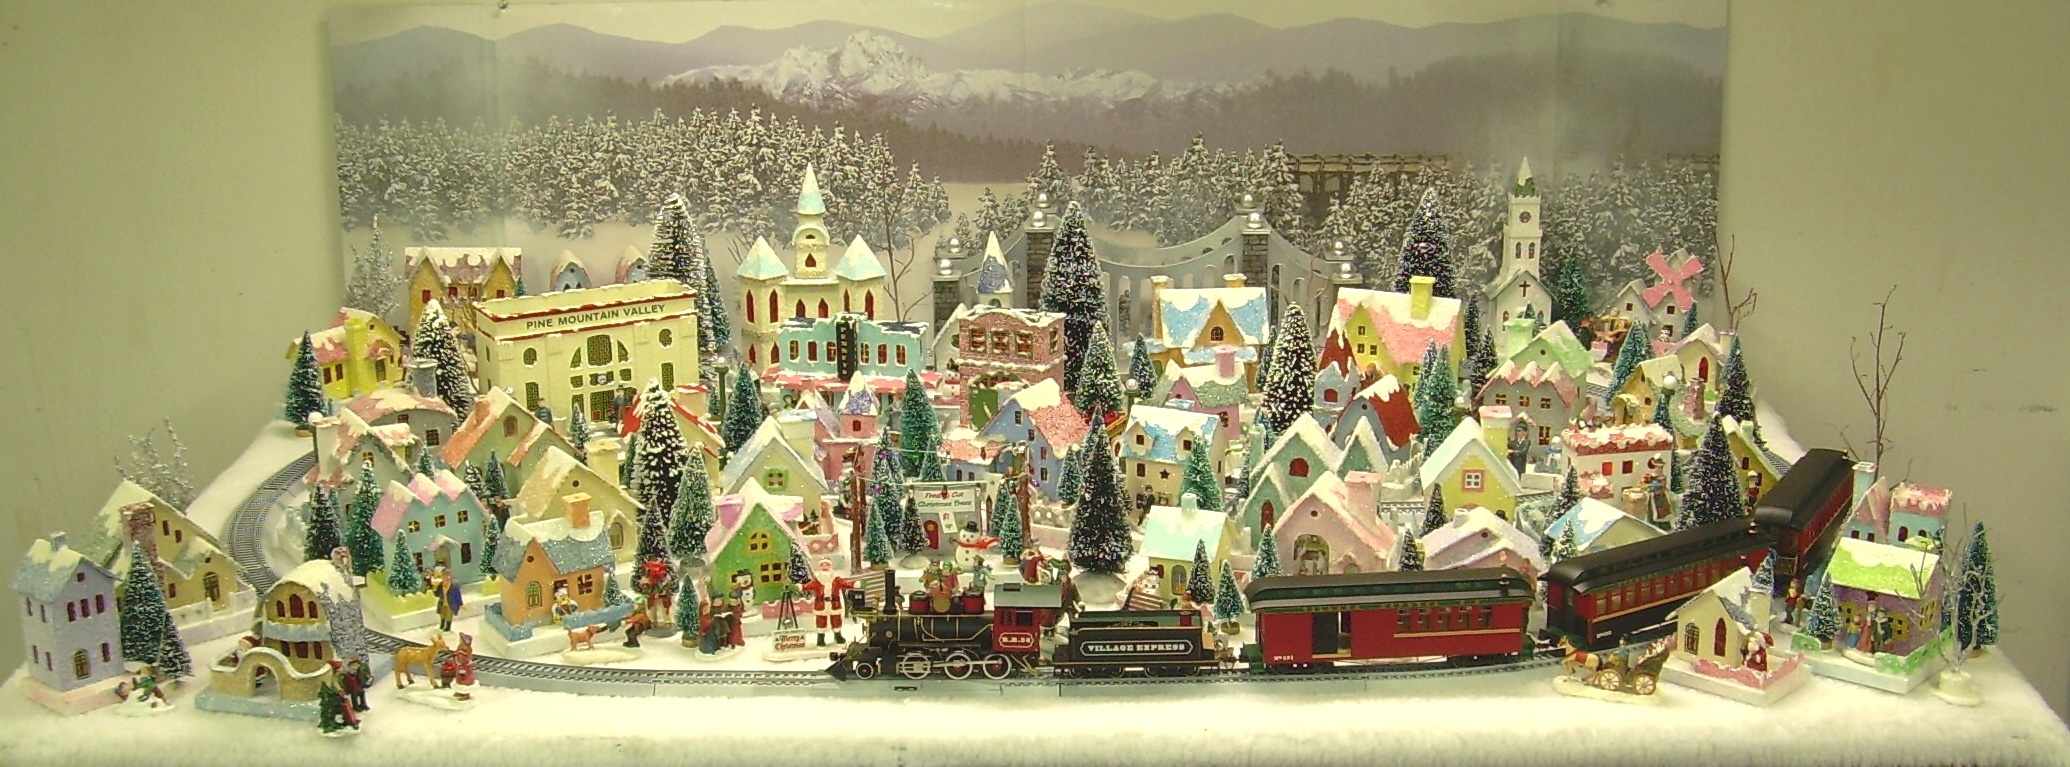 How To Make A Christmas Village Railroad | apexwallpapers.com